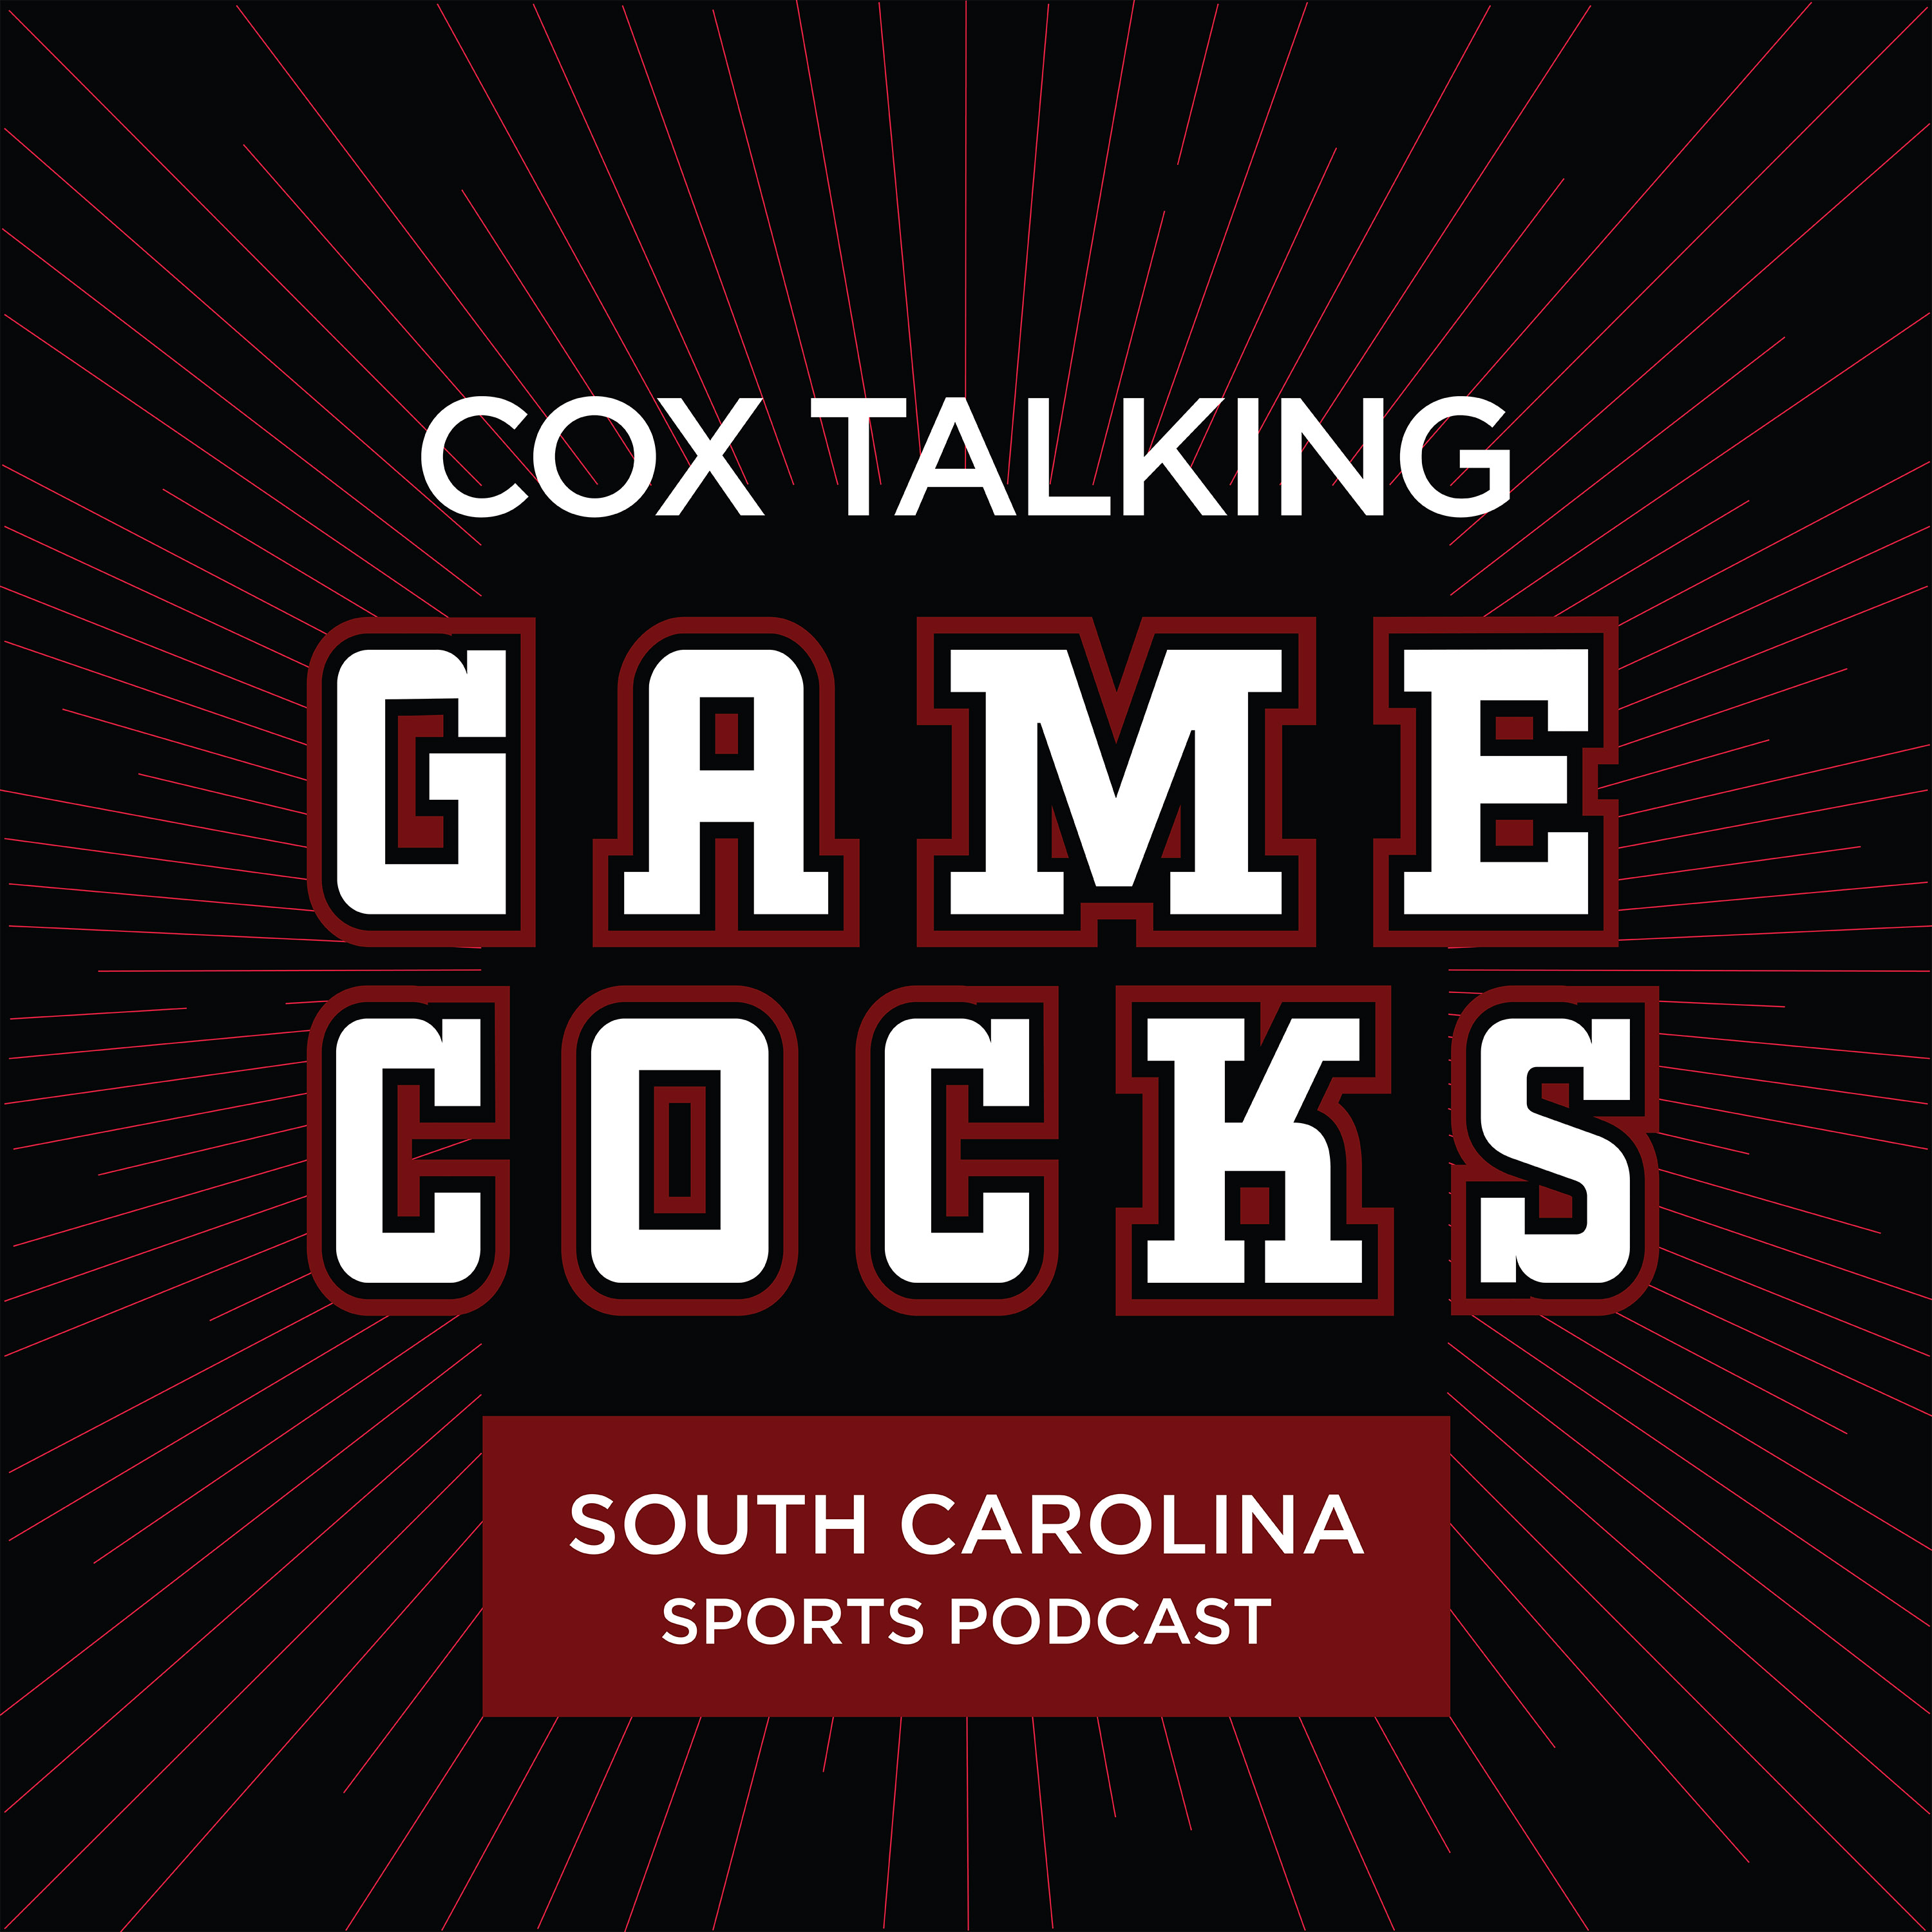 South Carolina Looks To Topple Tennessee Again: Pregame Analysis + MBB Adds Player & Six Pack of Picks